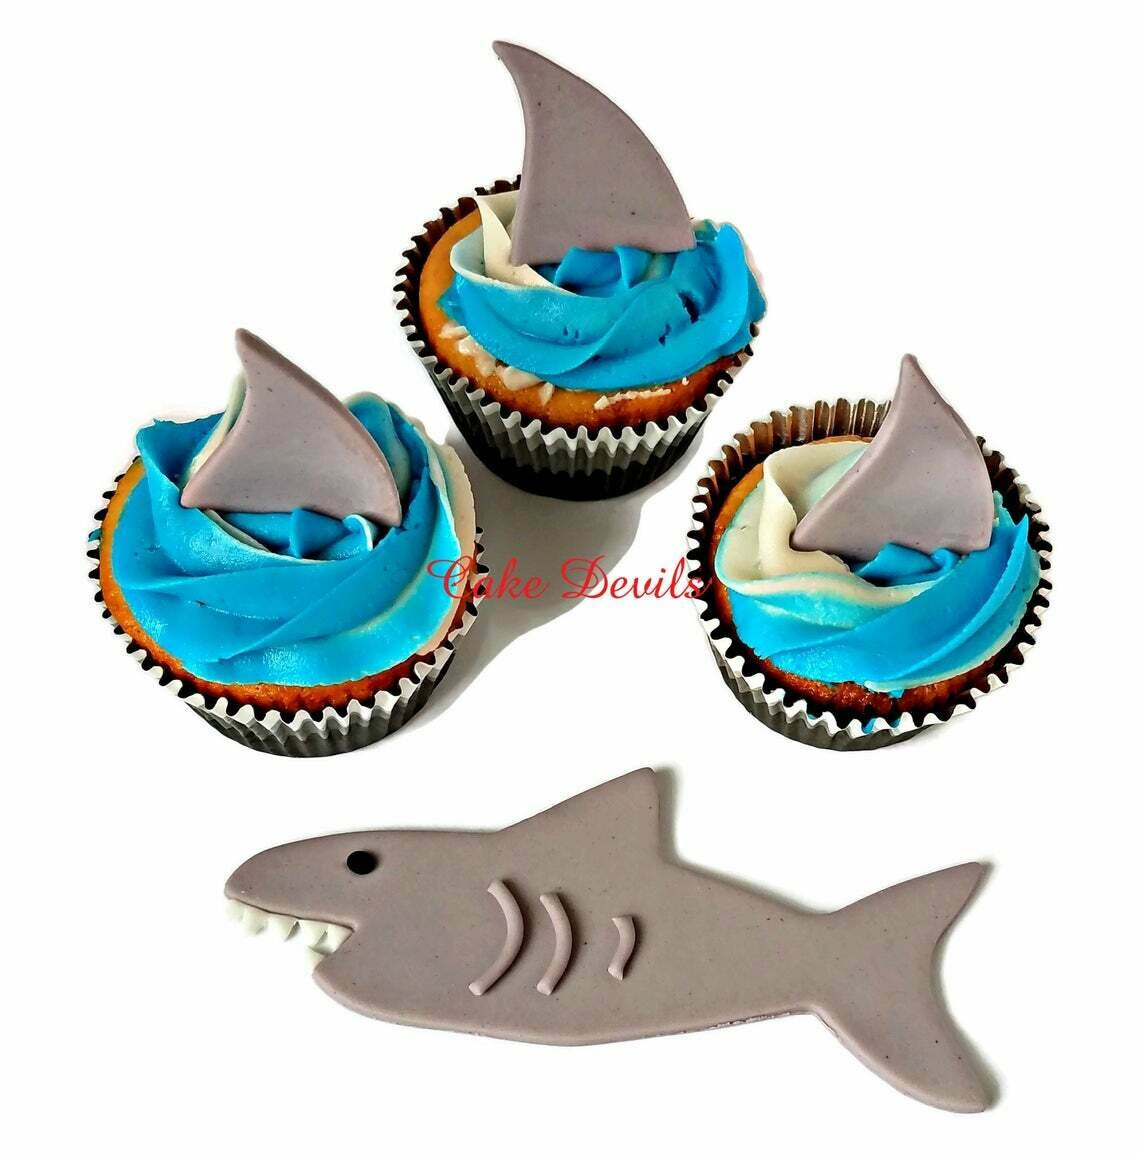 Shark Fin Fondant Cupcake Toppers and Shark Cake Decoration, Great for a Shark themed cake, Surf Cake, Pool Party, or Beach Party